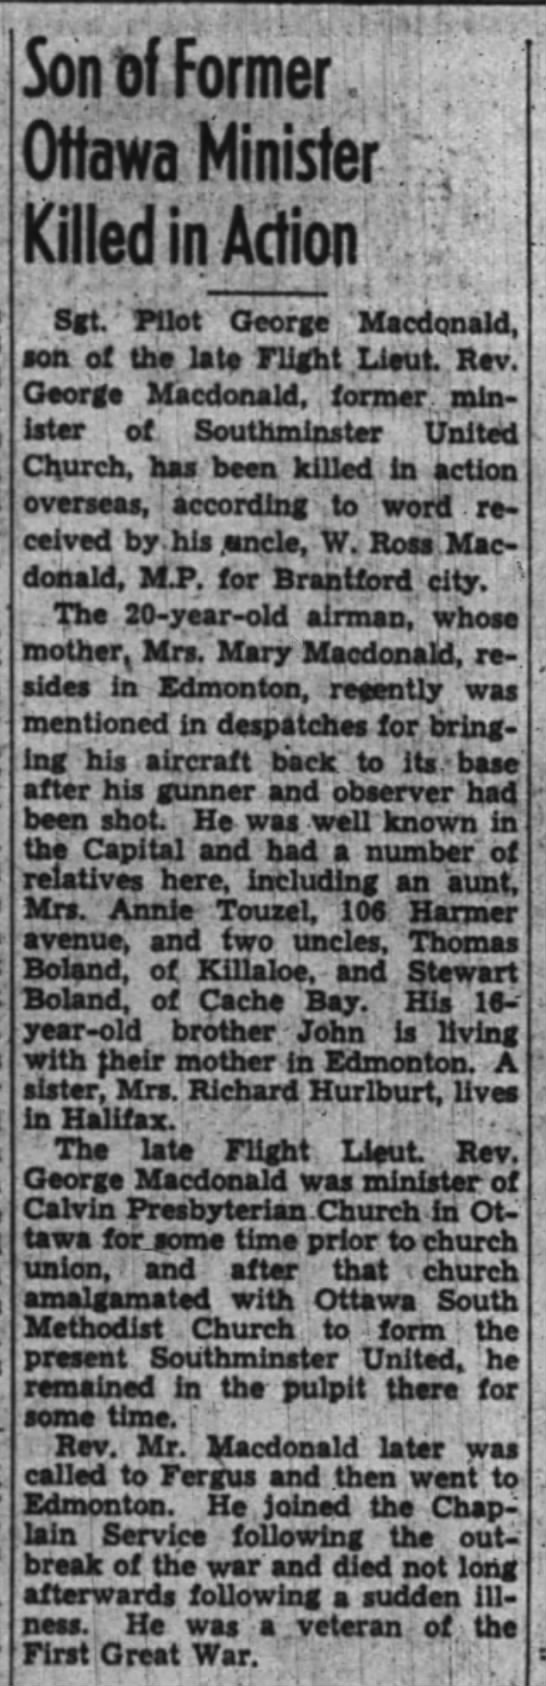 Son of Former Ottawa Minister Killed in Action - Sgt. Pilot George Macdonald - 